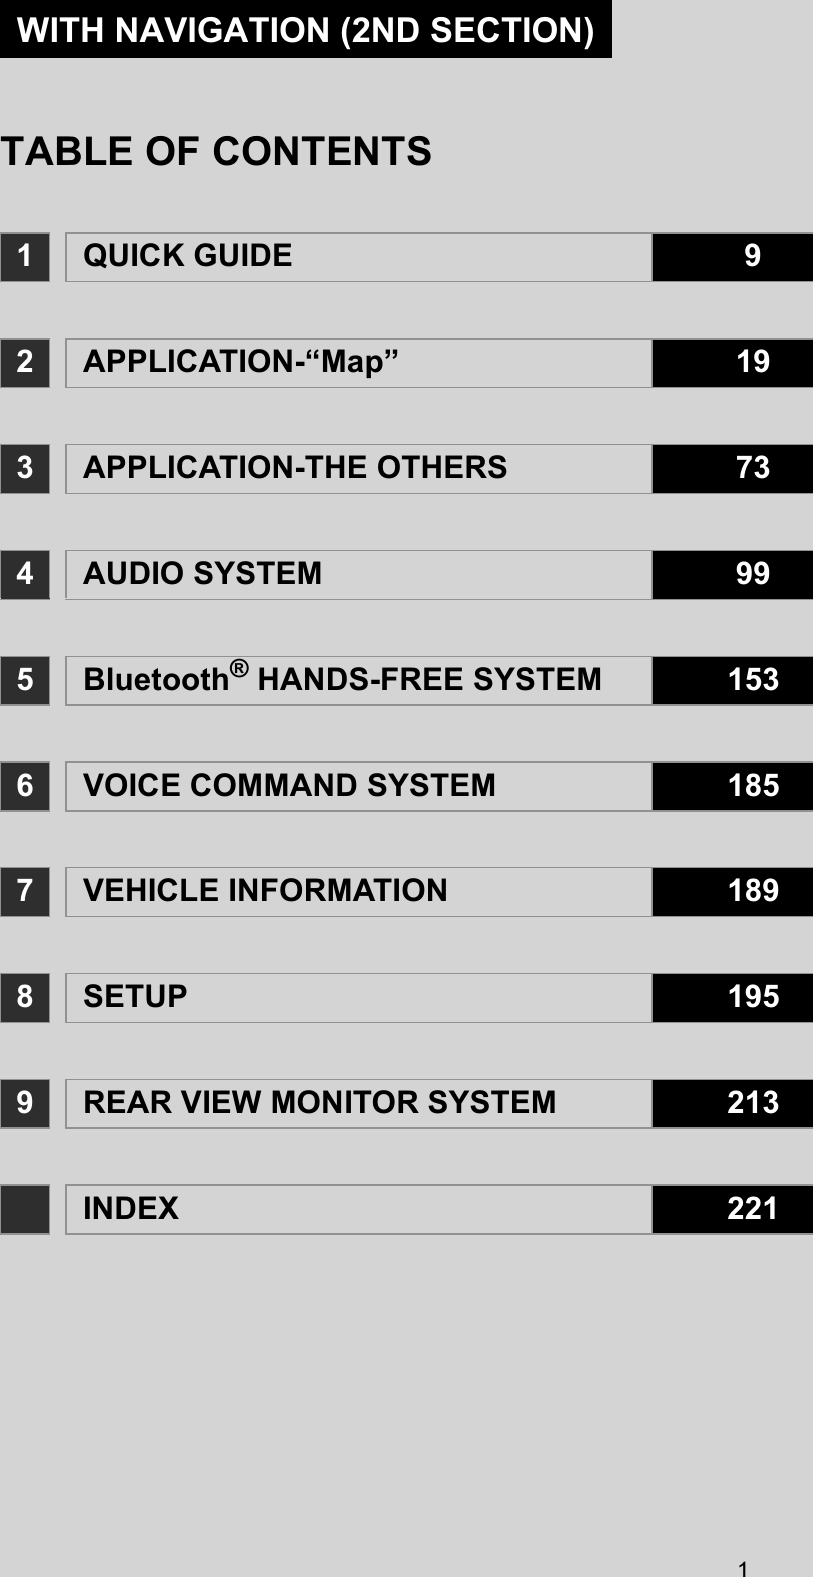 11QUICK GUIDE 92APPLICATION-“Map” 193APPLICATION-THE OTHERS 734AUDIO SYSTEM 995Bluetooth® HANDS-FREE SYSTEM 1536VOICE COMMAND SYSTEM 1857VEHICLE INFORMATION 1898SETUP 1959REAR VIEW MONITOR SYSTEM 213INDEX 221WITH NAVIGATION (2ND SECTION)TABLE OF CONTENTS